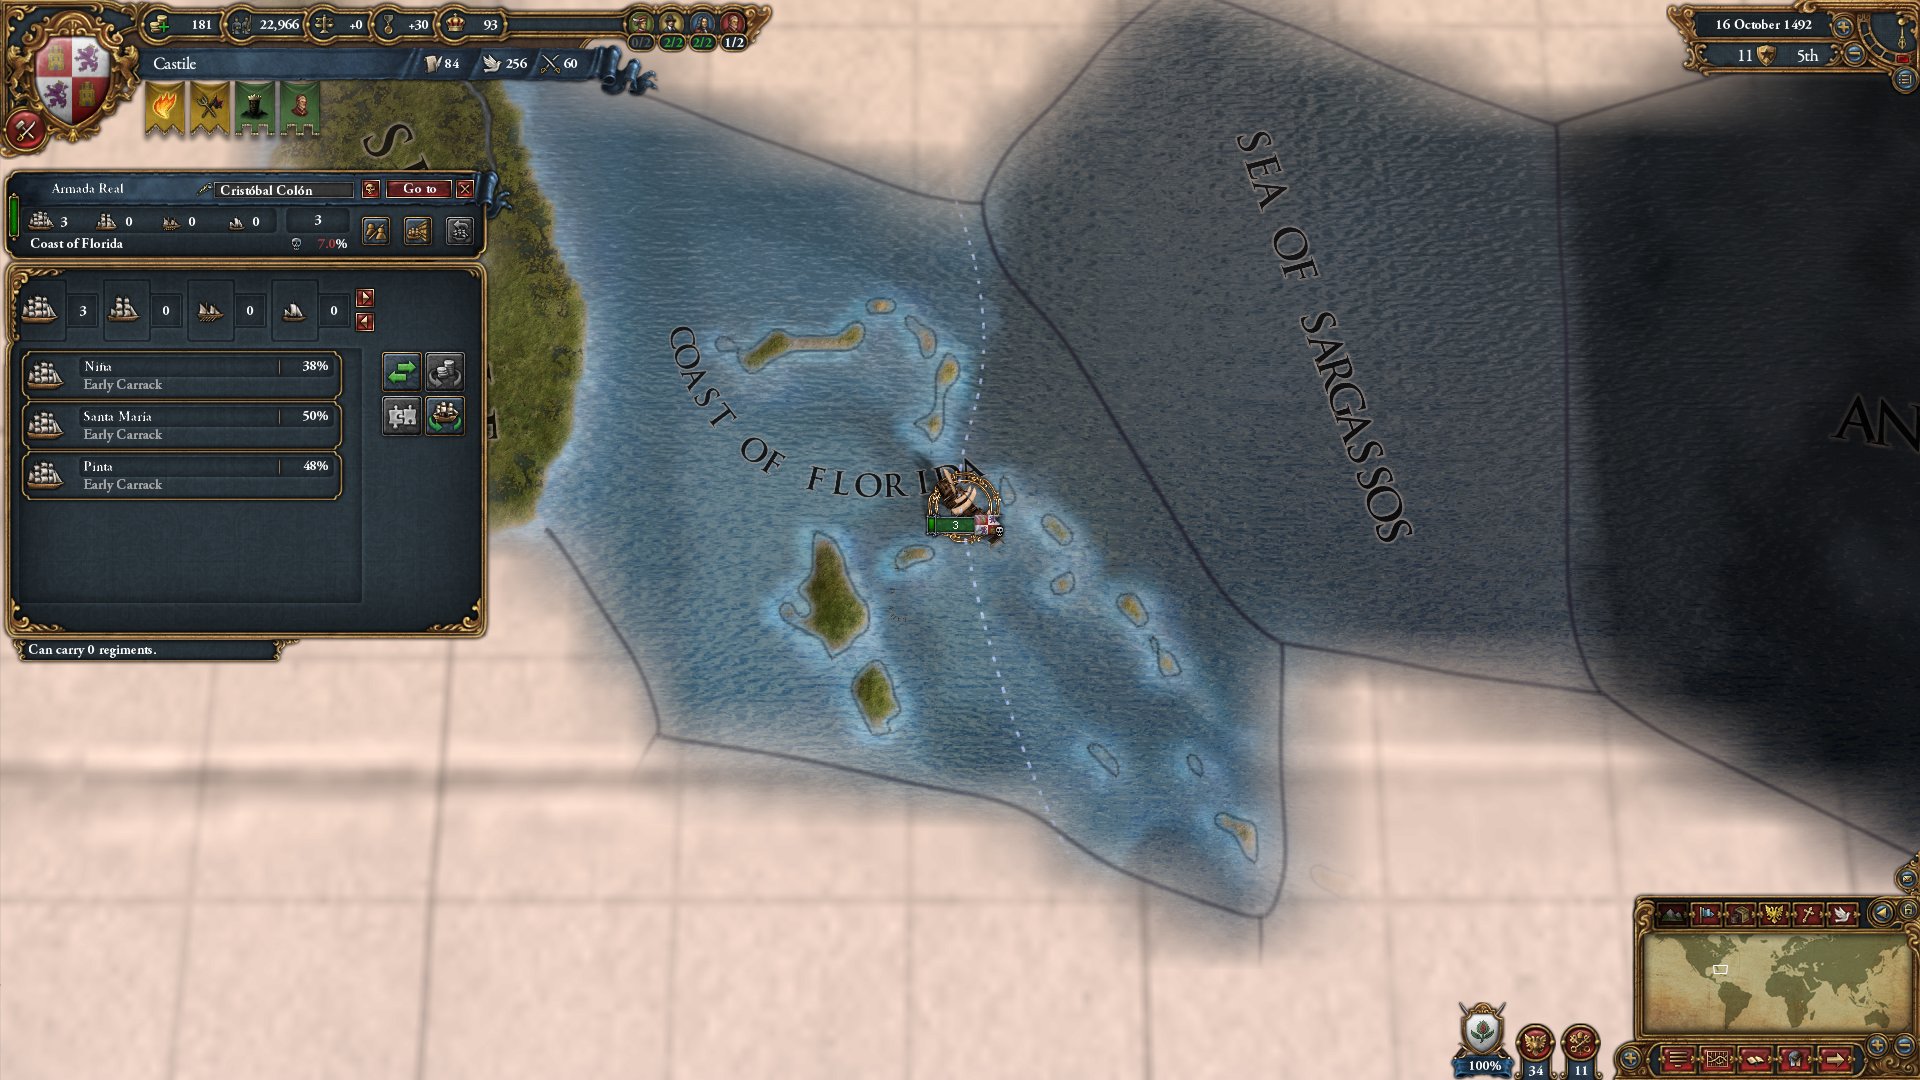 Expansion - Europa Universalis IV: Conquest of Paradise Featured Screenshot #1